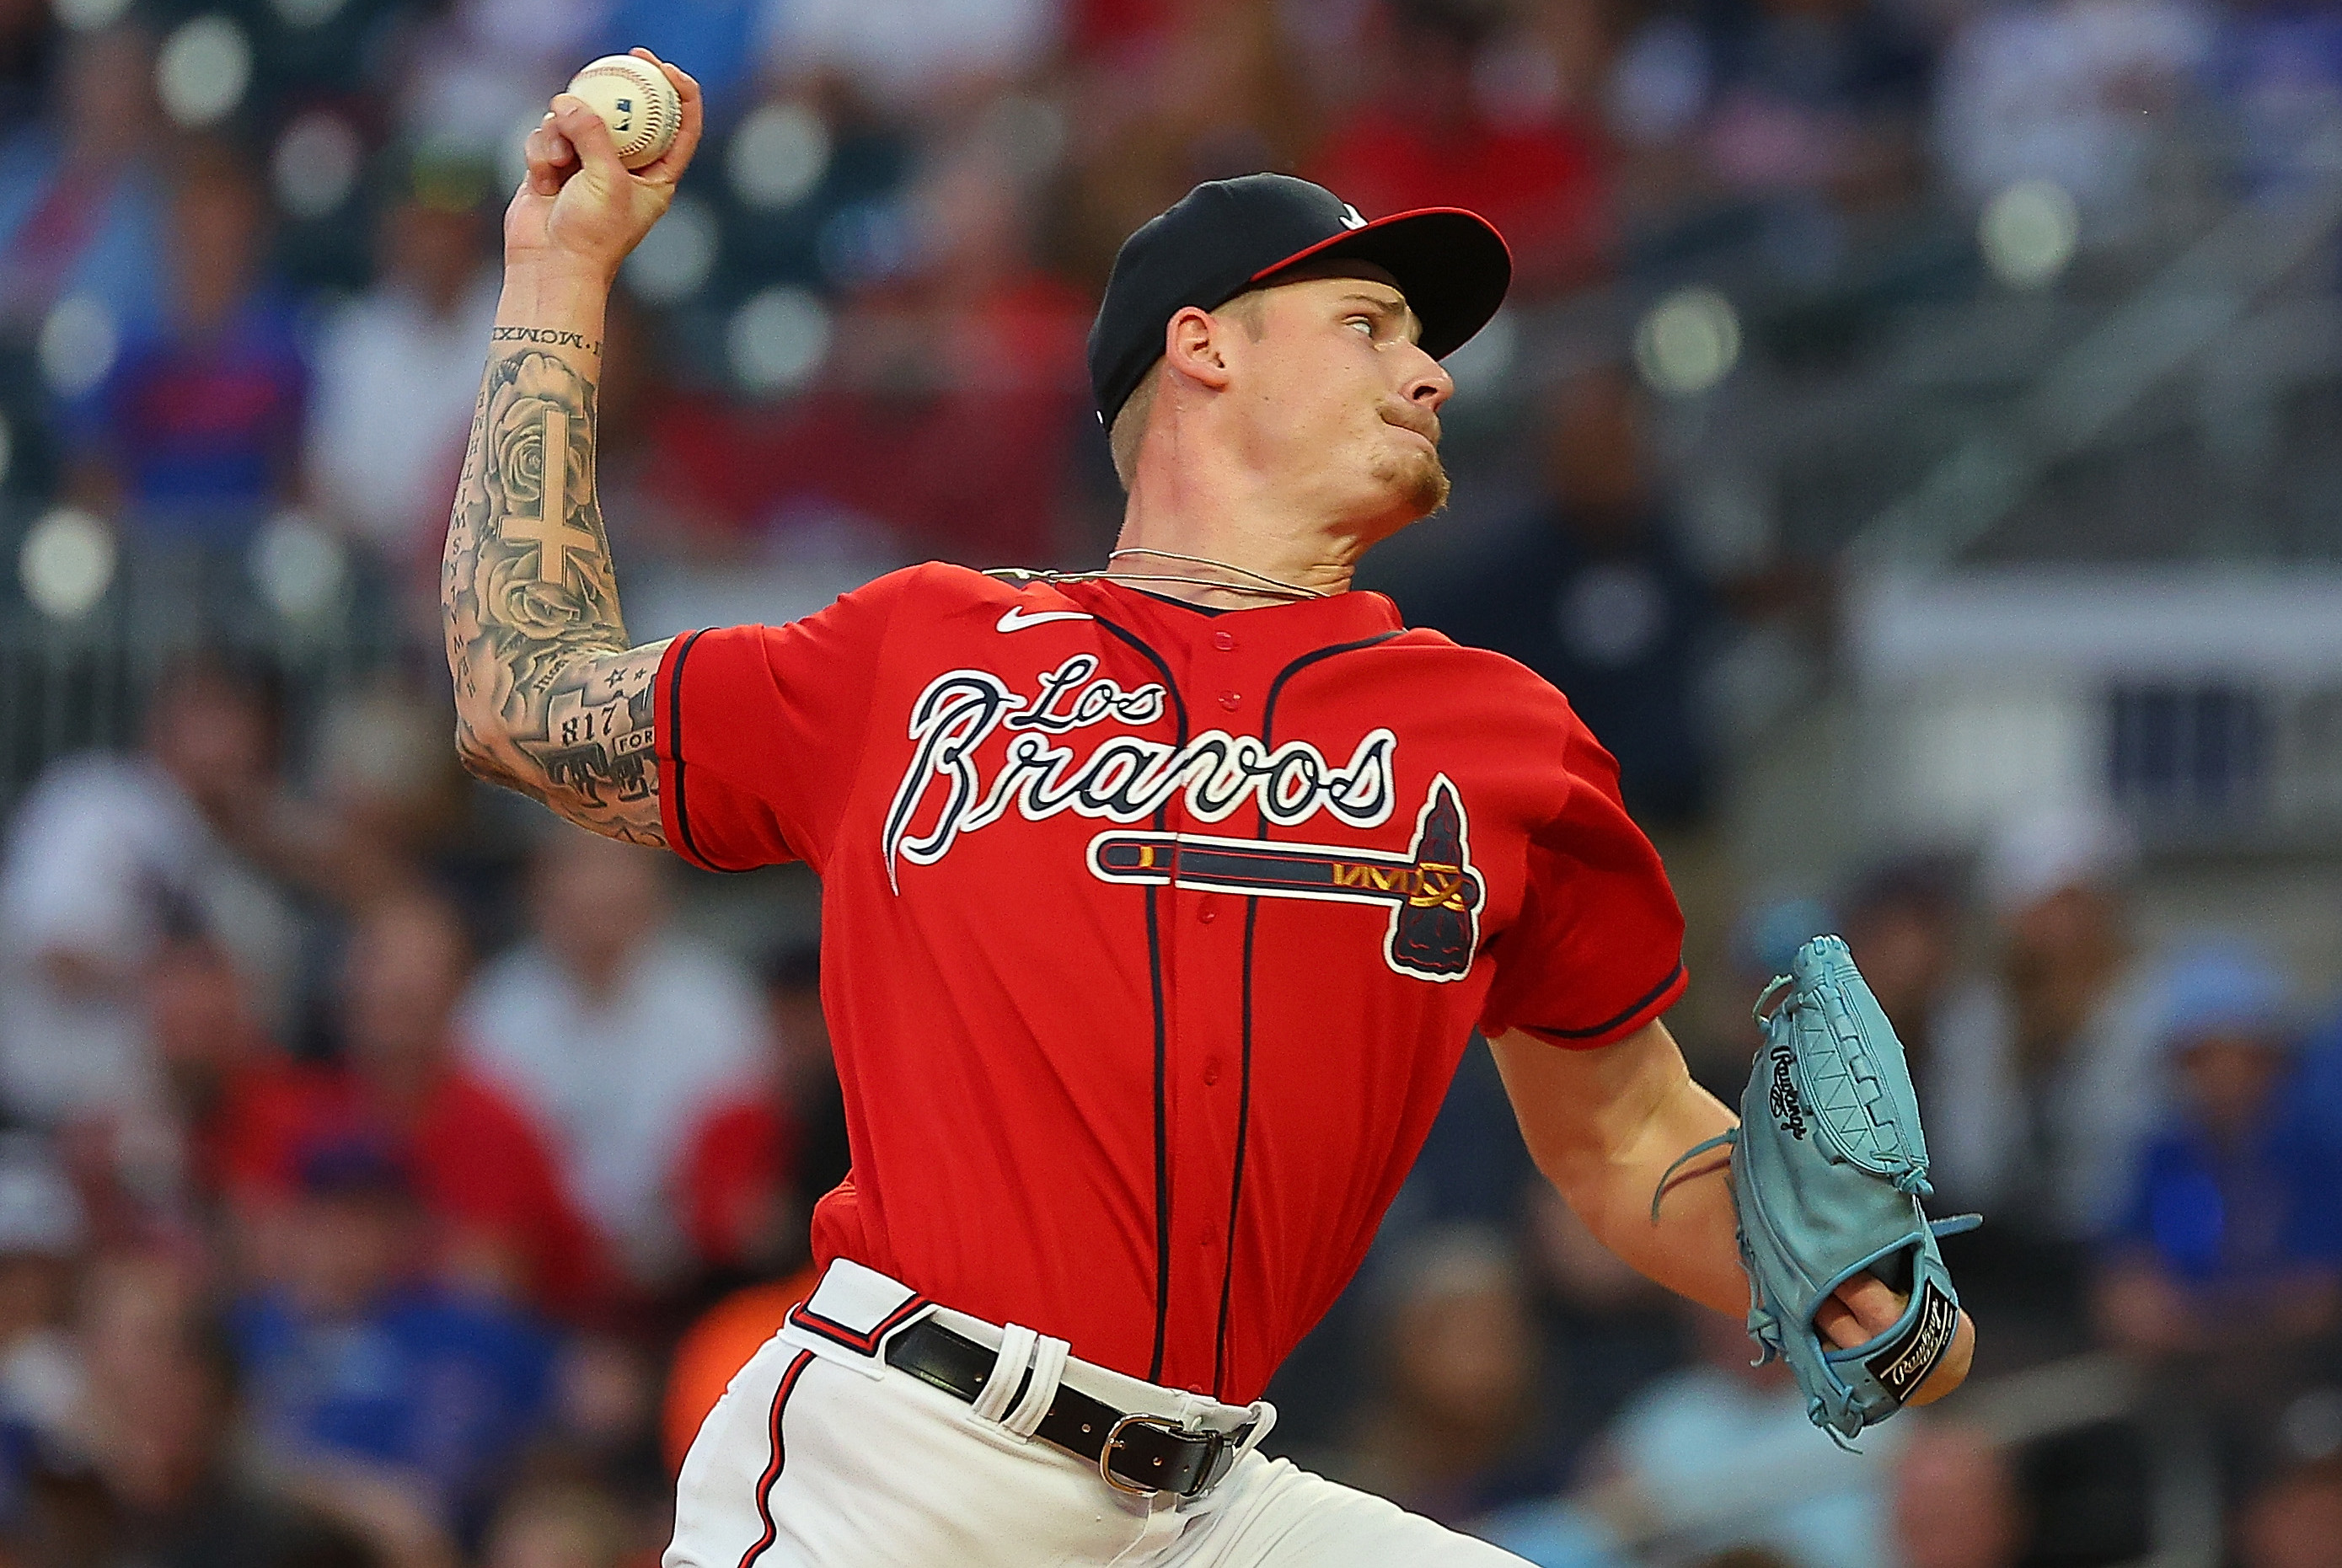 After near no-hitter, Atlanta Braves pitcher Sean Newcomb apologizes for  offensive tweets - CBS News